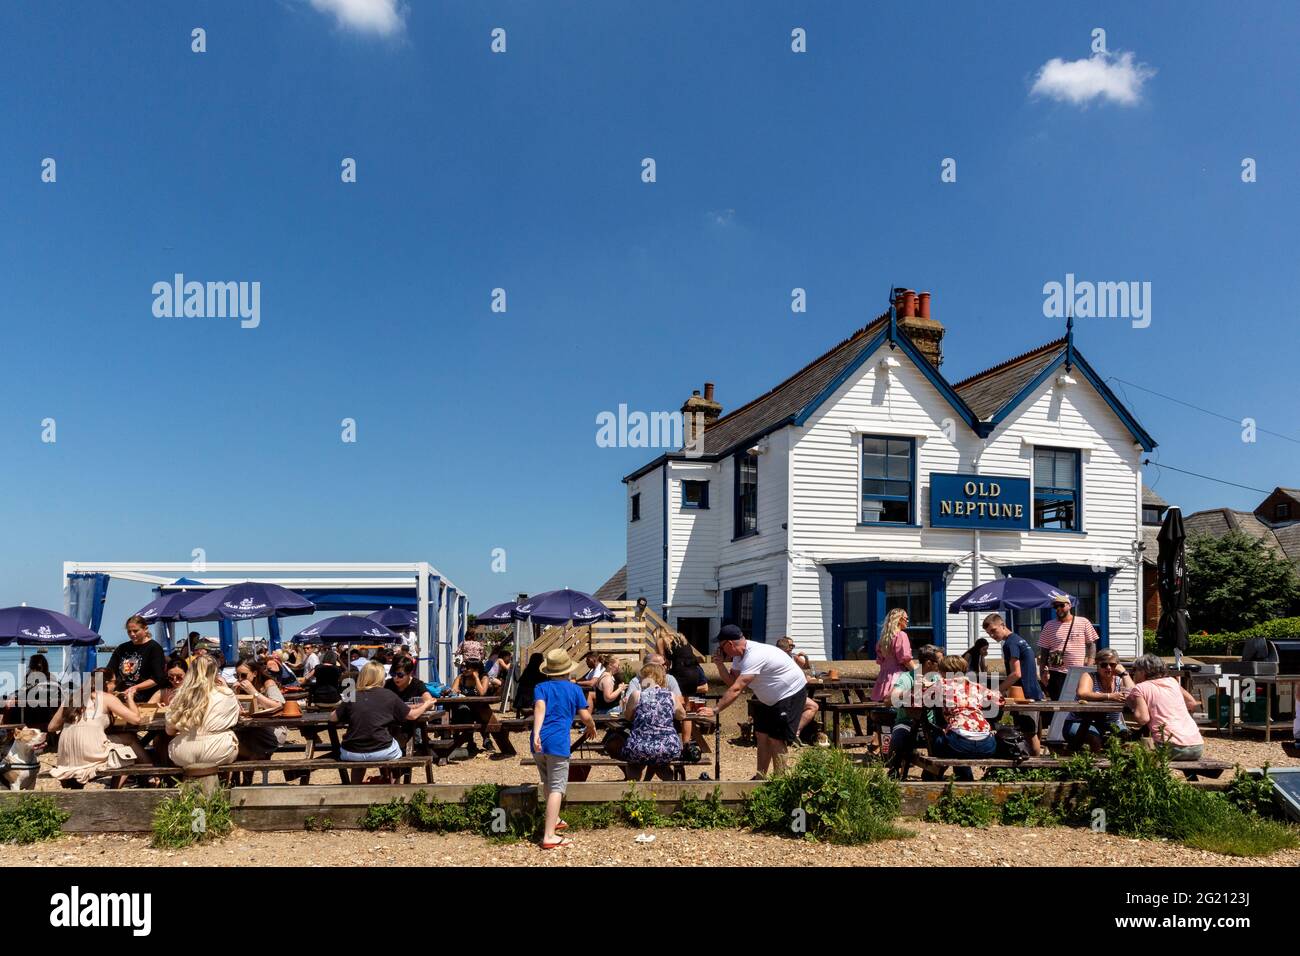 Whitstable, United Kingdom, June 7, 2021. People sit in a pub at the beach  in  Whitstable, a coastal touristic town in south-eastern England as the holiday season begins  and the Coronavirus lockdown eases. One of the strictest Coronavirus lockdowns in the world  is partially lifted as the United Kingdom managed to vaccinate a large part of the population and the number of Covid cases is low. People are able to socialize and pubs and restaurants can now host guests. Credit: Dominika Zarzycka/Alamy Live News Stock Photo